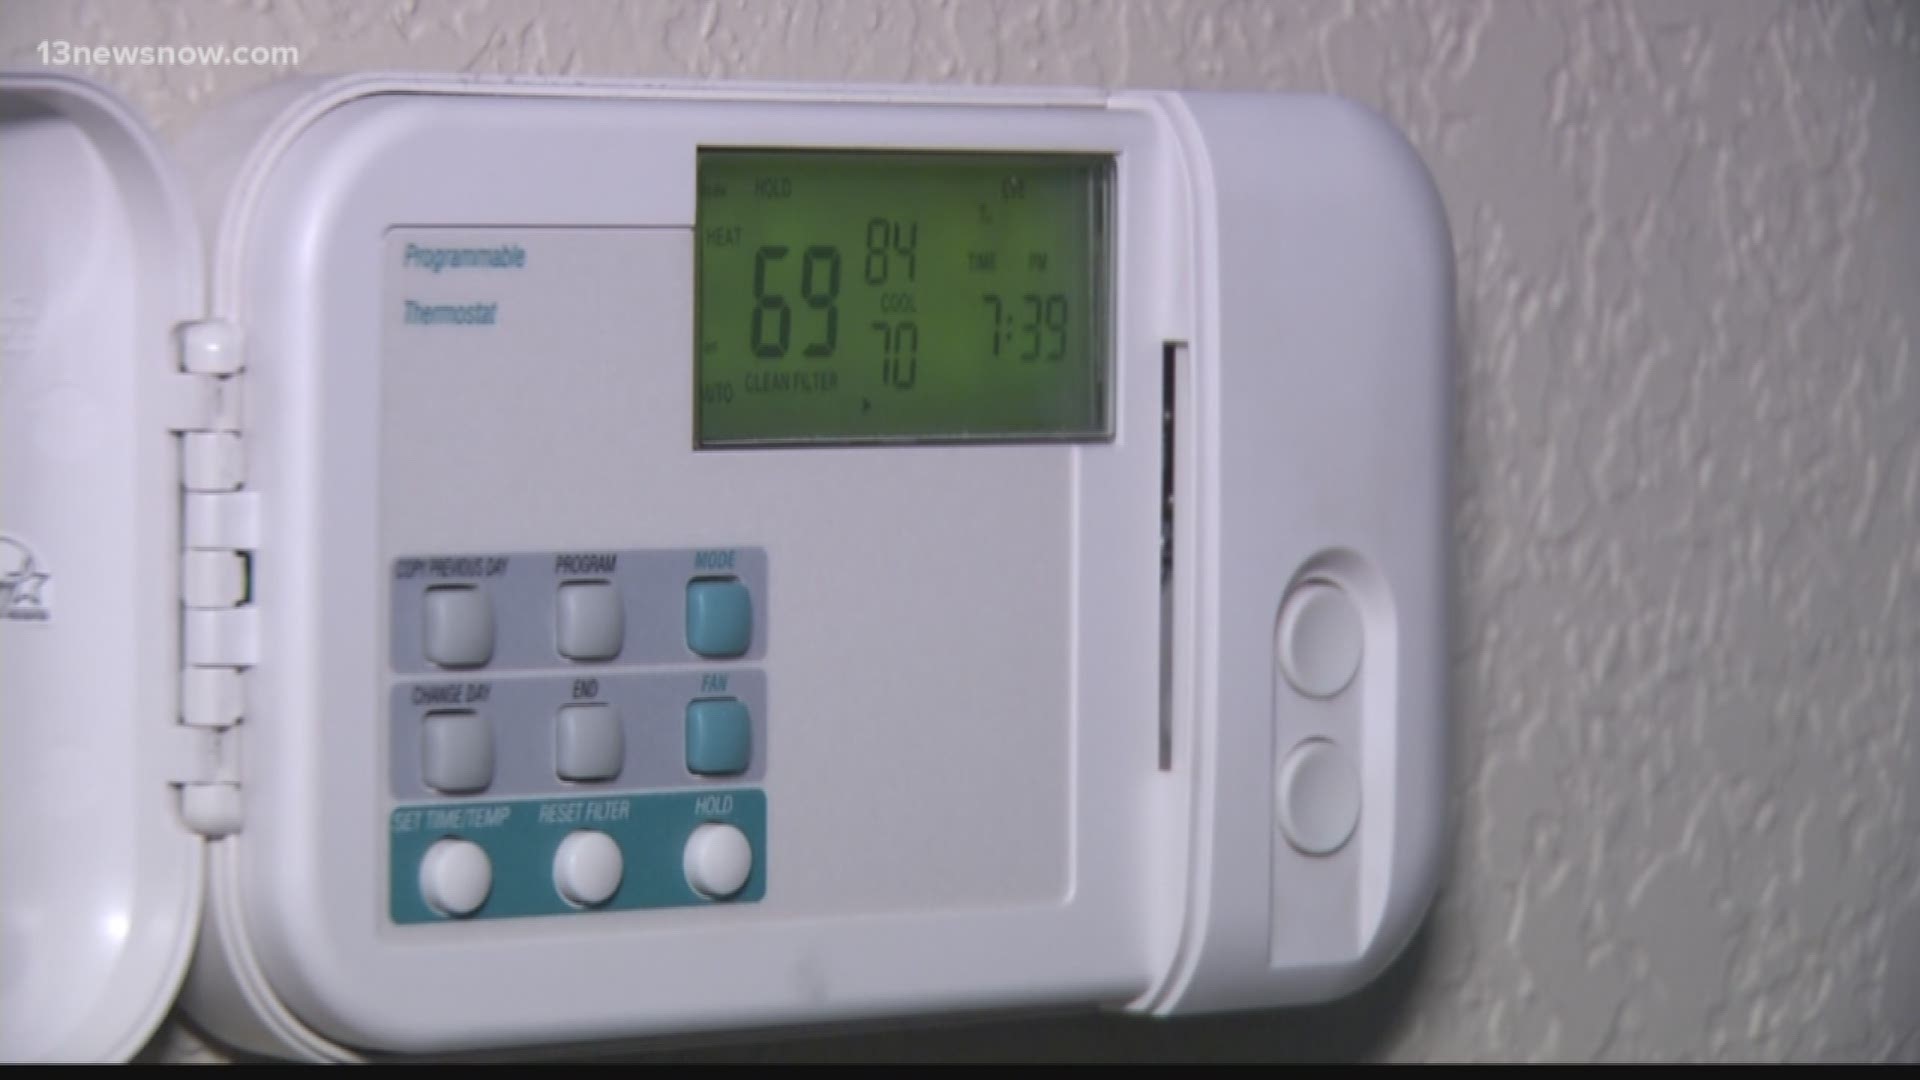 Home heating reminders to help you stay warm and save money as winter weather approaches.